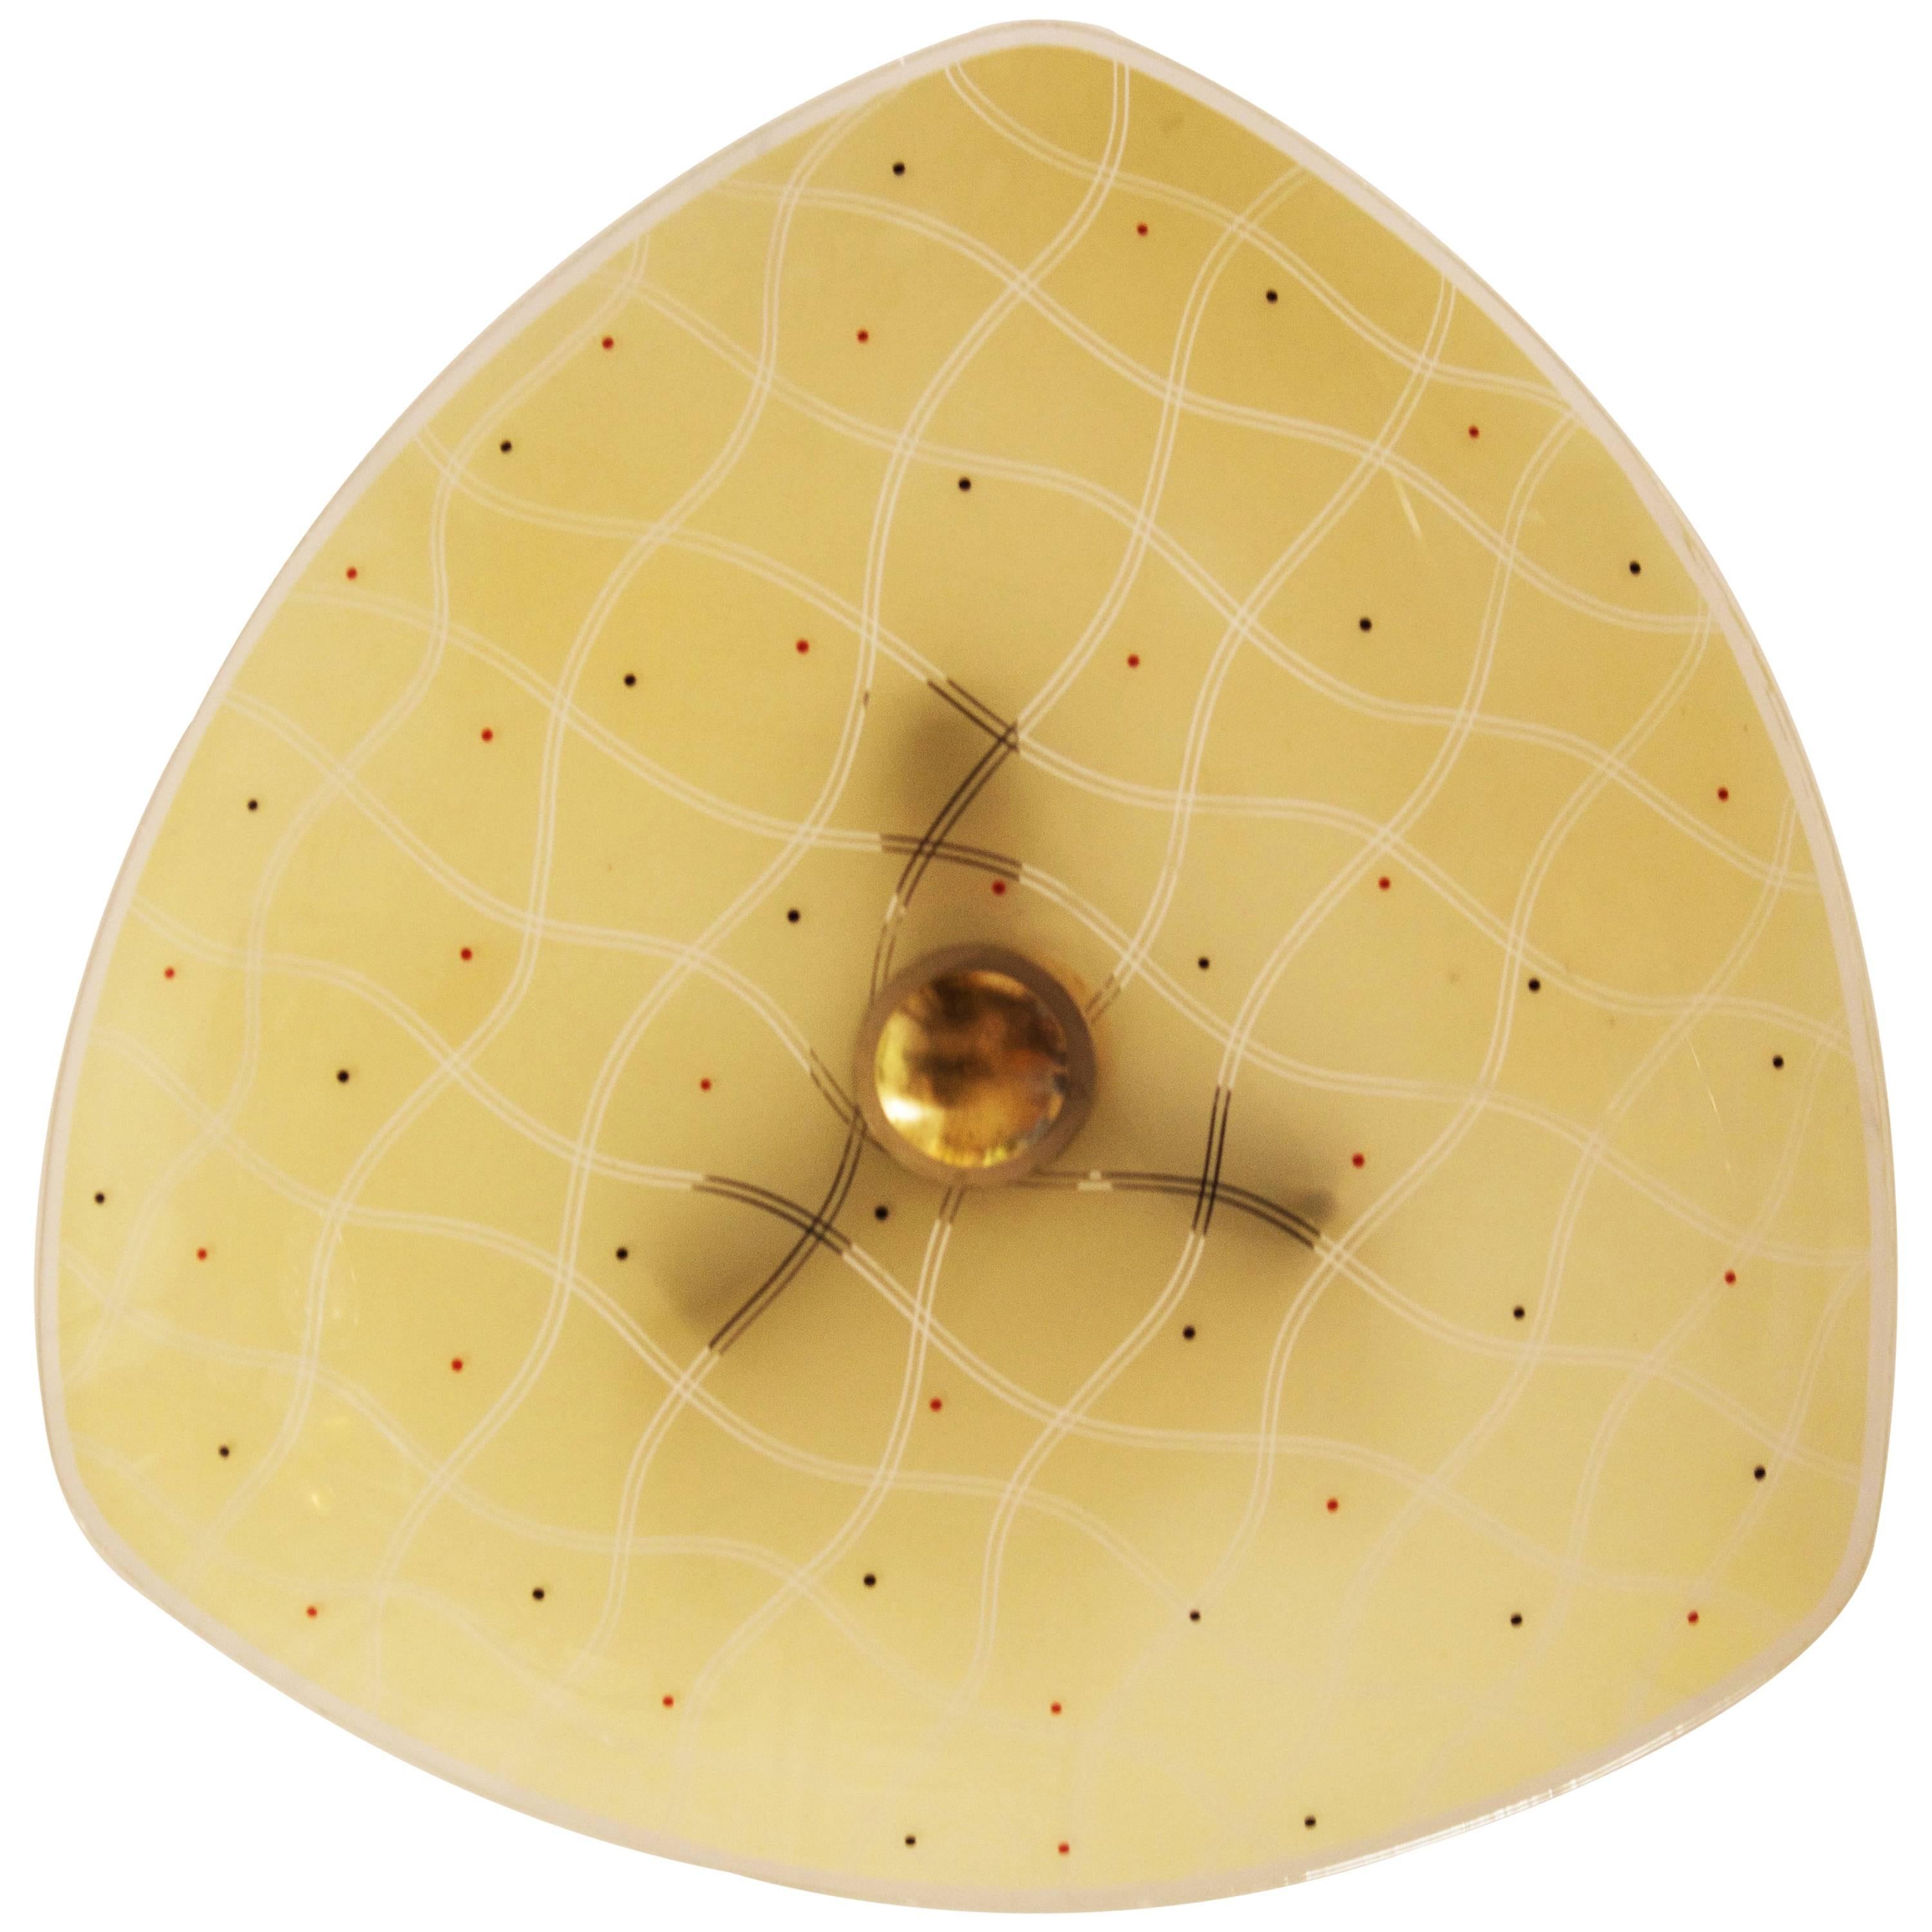 Czech Midcentury Glass Pendant Lamp for Brussels World Expo, 1958 For Sale